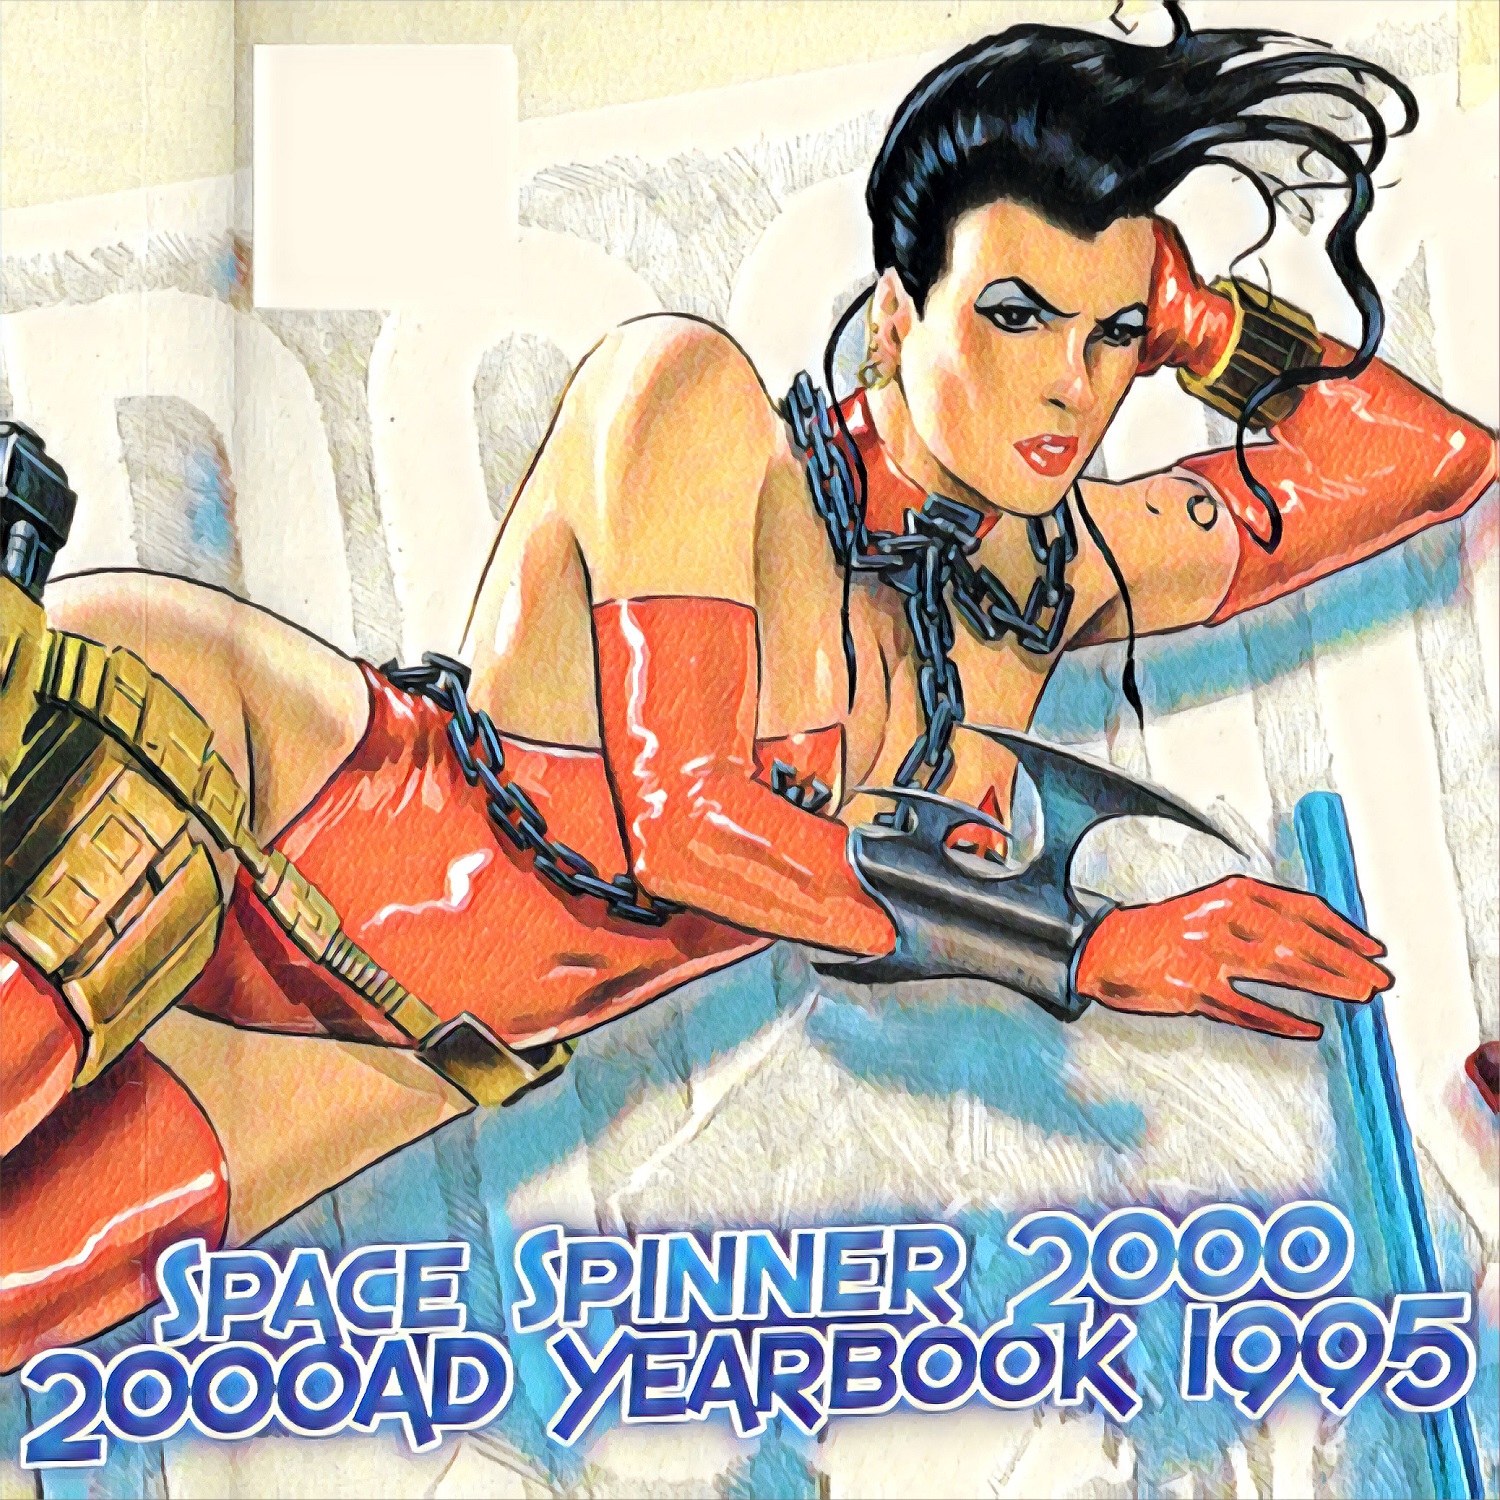 ep 297 – 1995 2000AD Yearbook